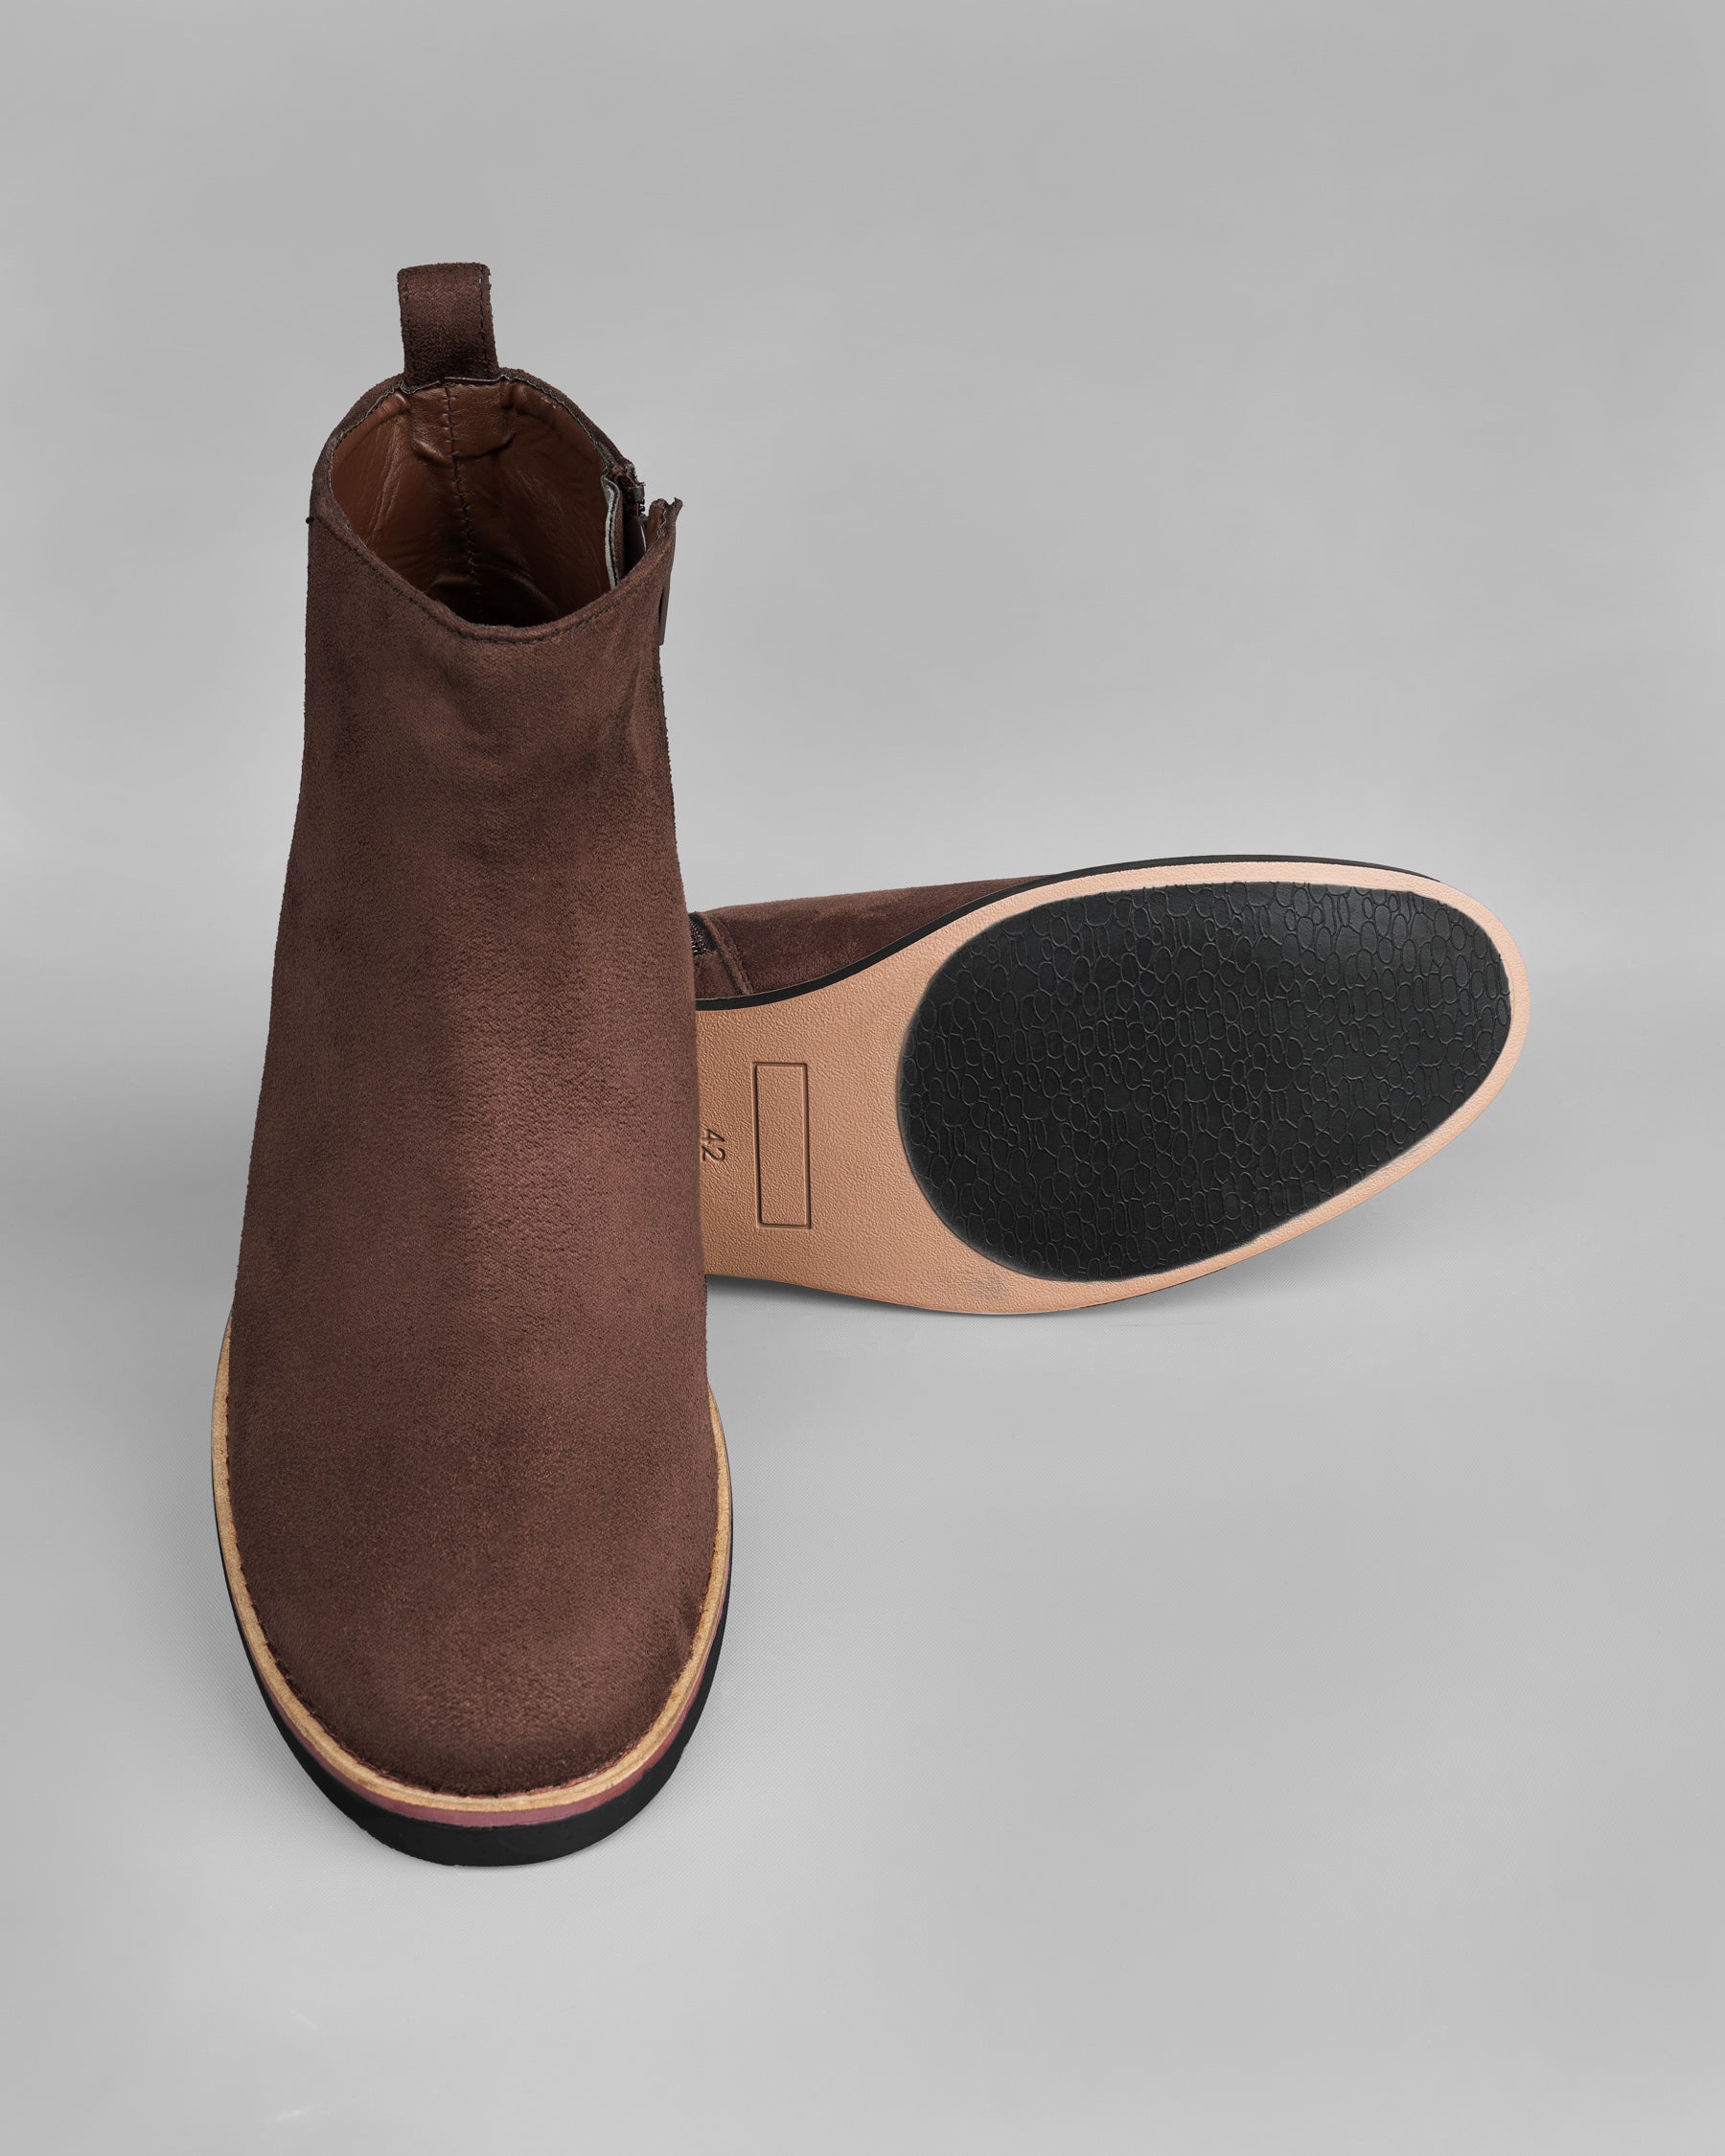 Taupe Brown Zipper suede Chelsea Boots FT064-6, FT064-7, FT064-8, FT064-9, FT064-10